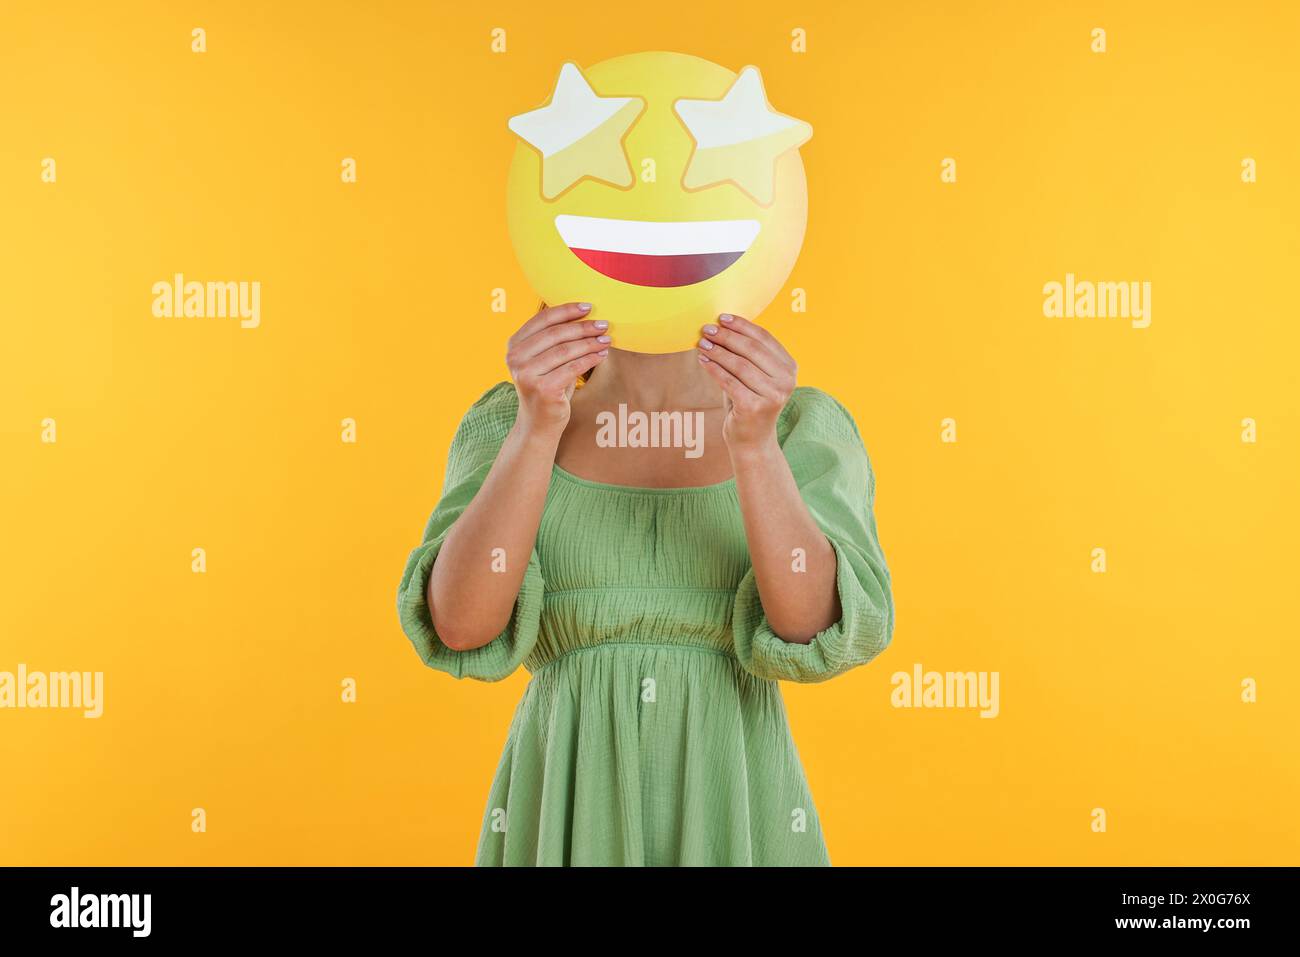 Woman holding emoticon with stars instead of eyes on yellow background Stock Photo